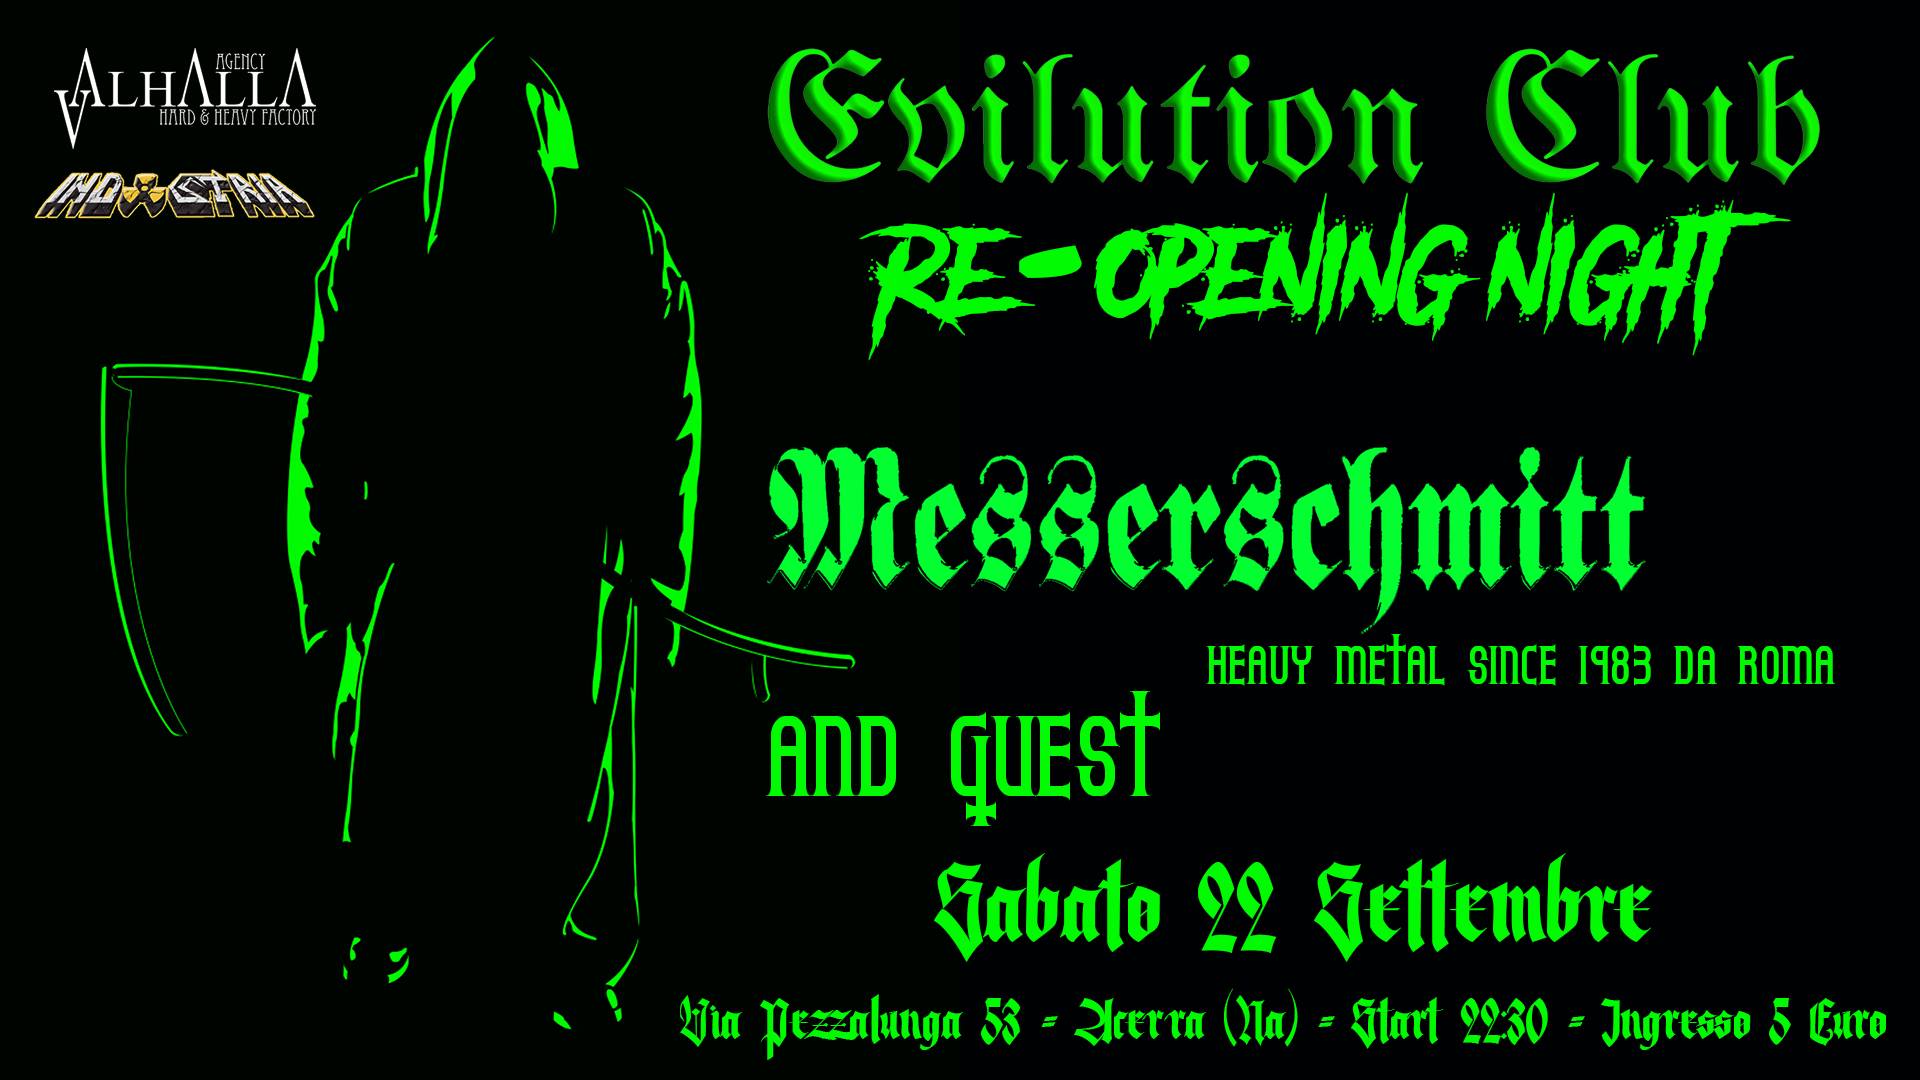 Sabato 22 settembre – Evilution Club Re-Opening Night